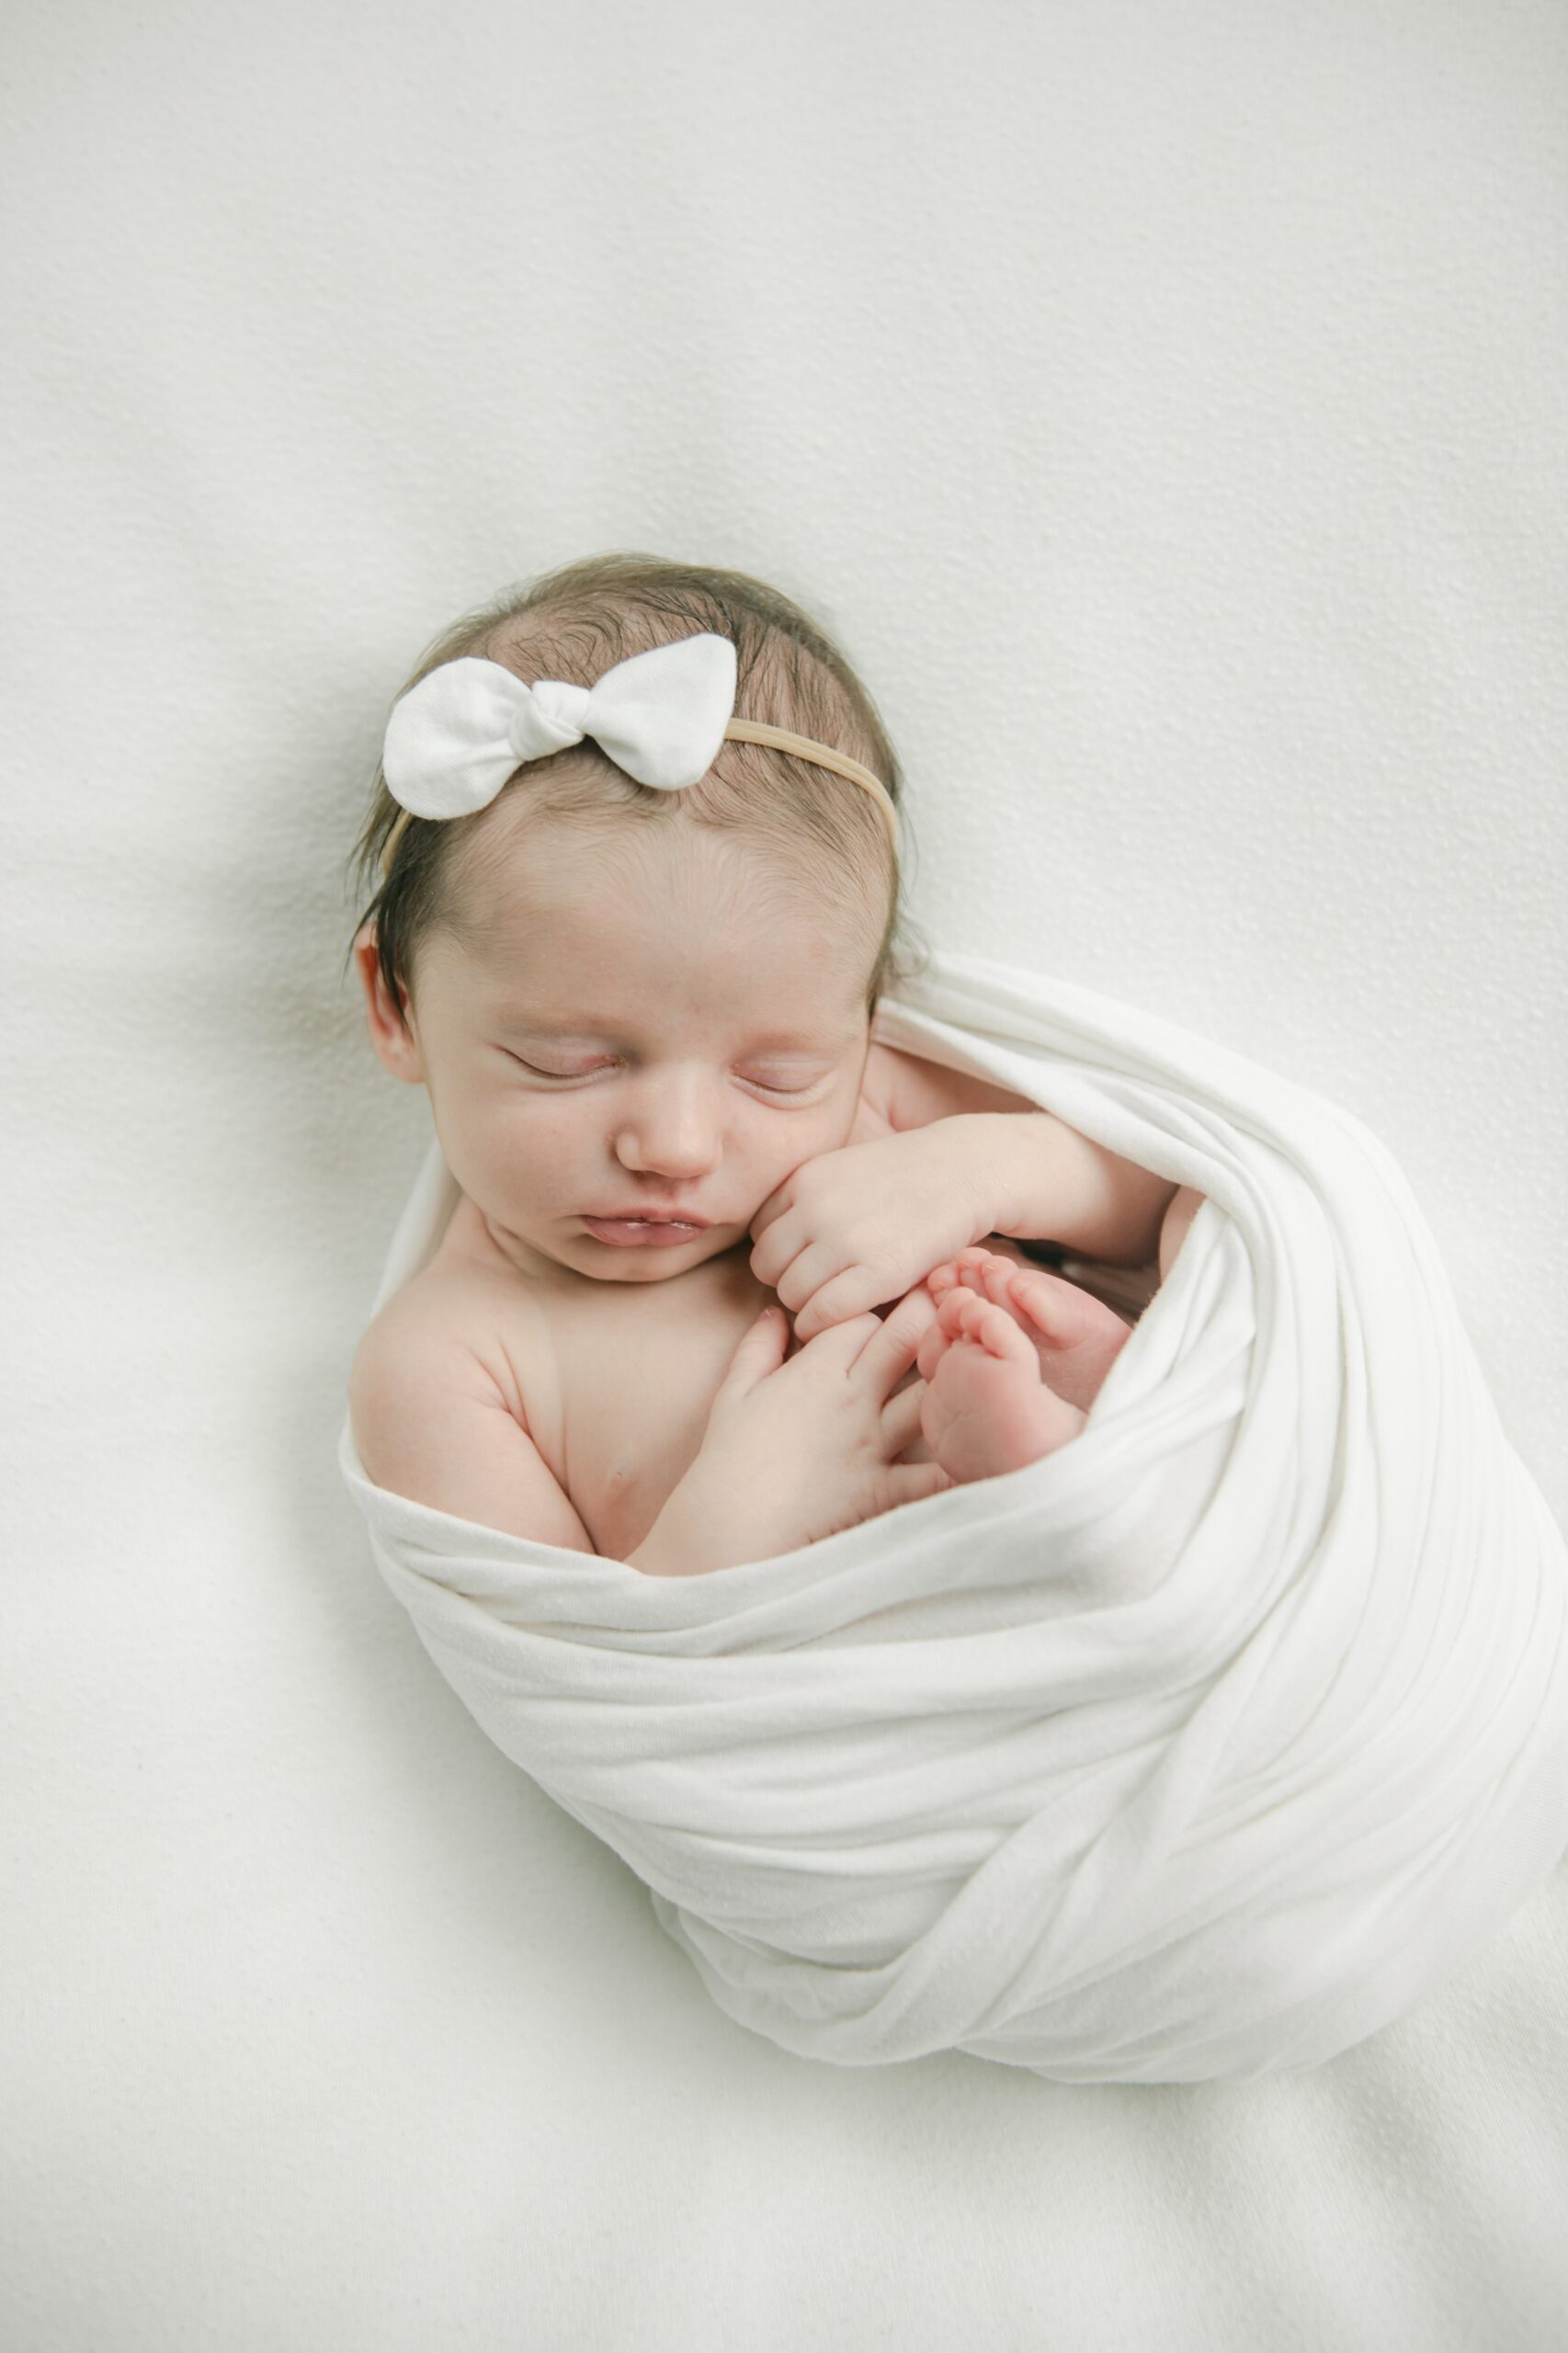 A newborn baby sleeps in a white swaddle on a white bed bryn mawr labor and delivery